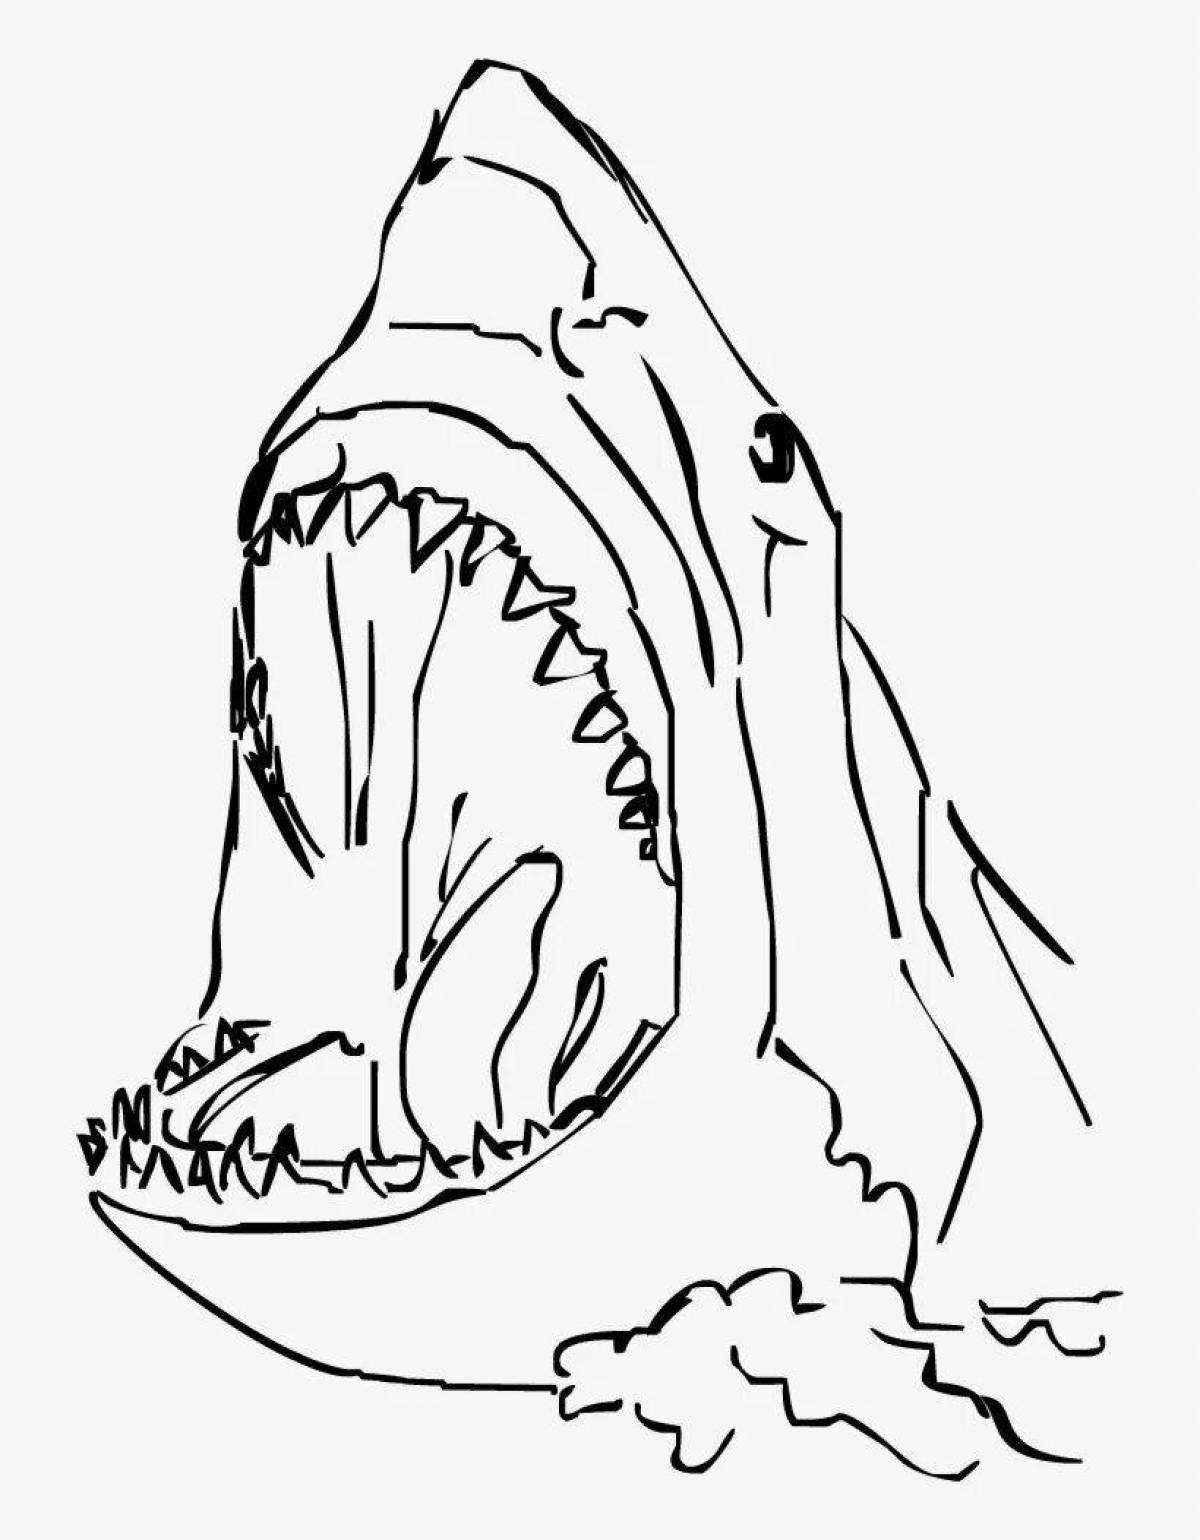 Glorious megalodon coloring book for kids